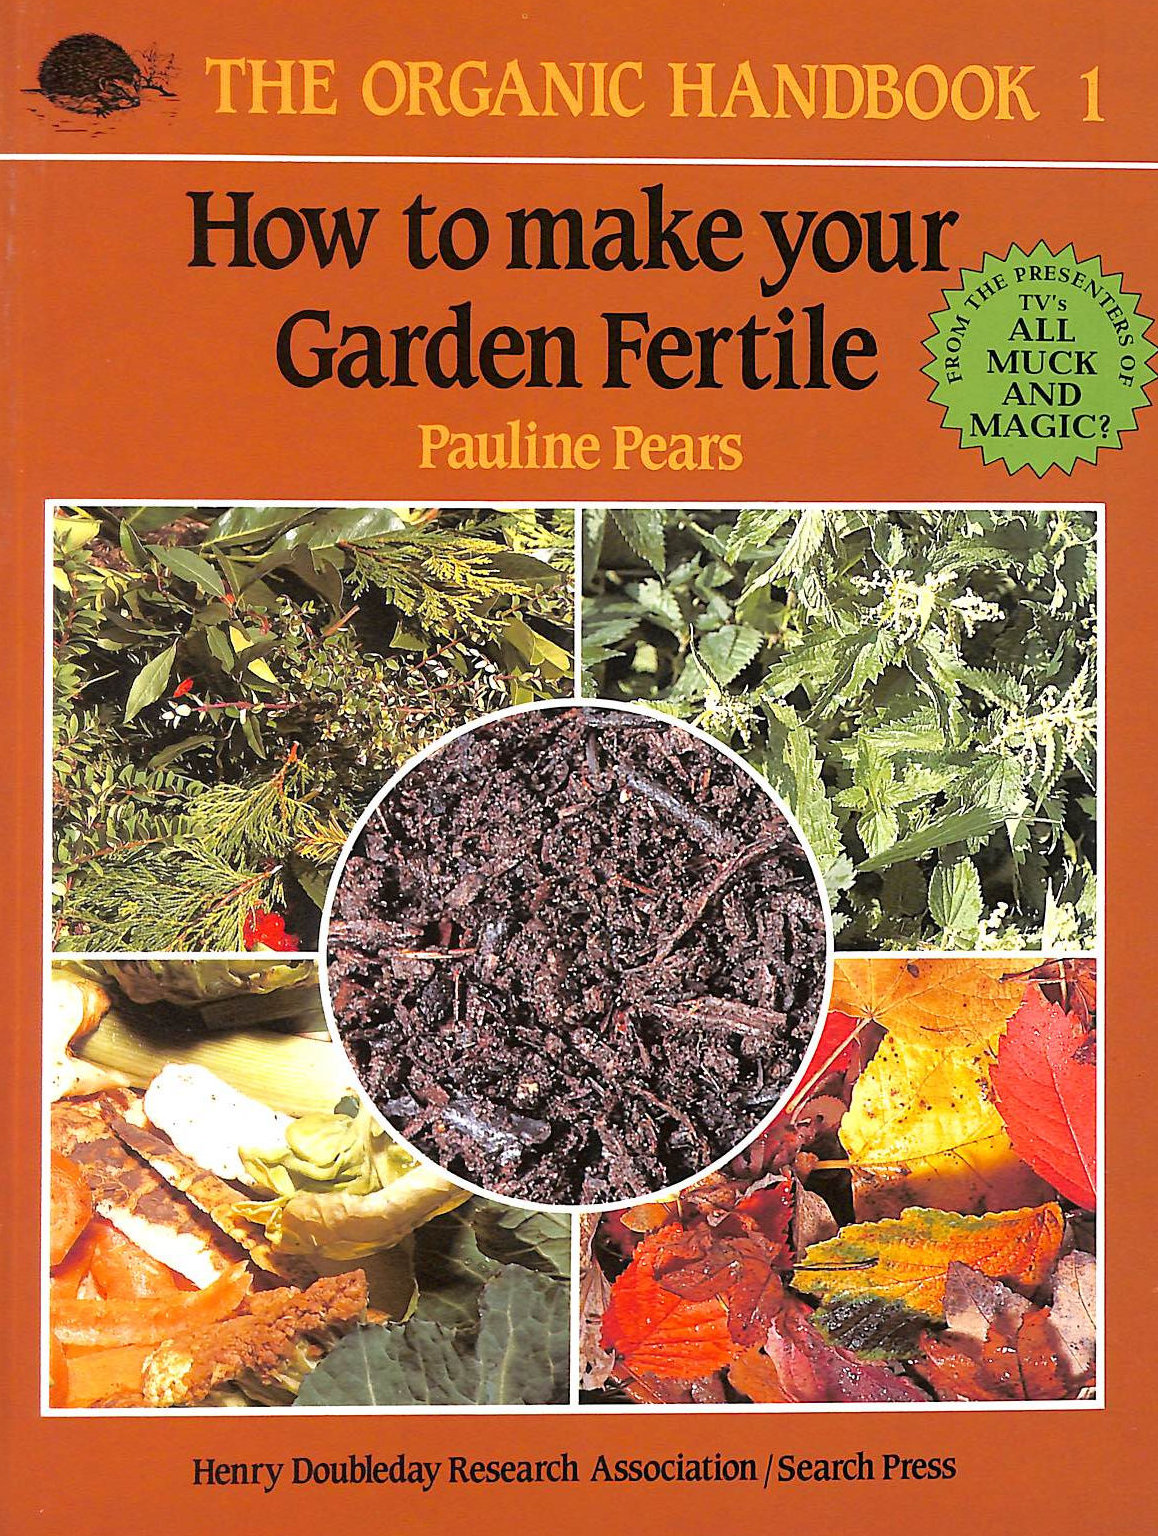 PEARS, PAULINE M. - How to Make Your Garden Fertile